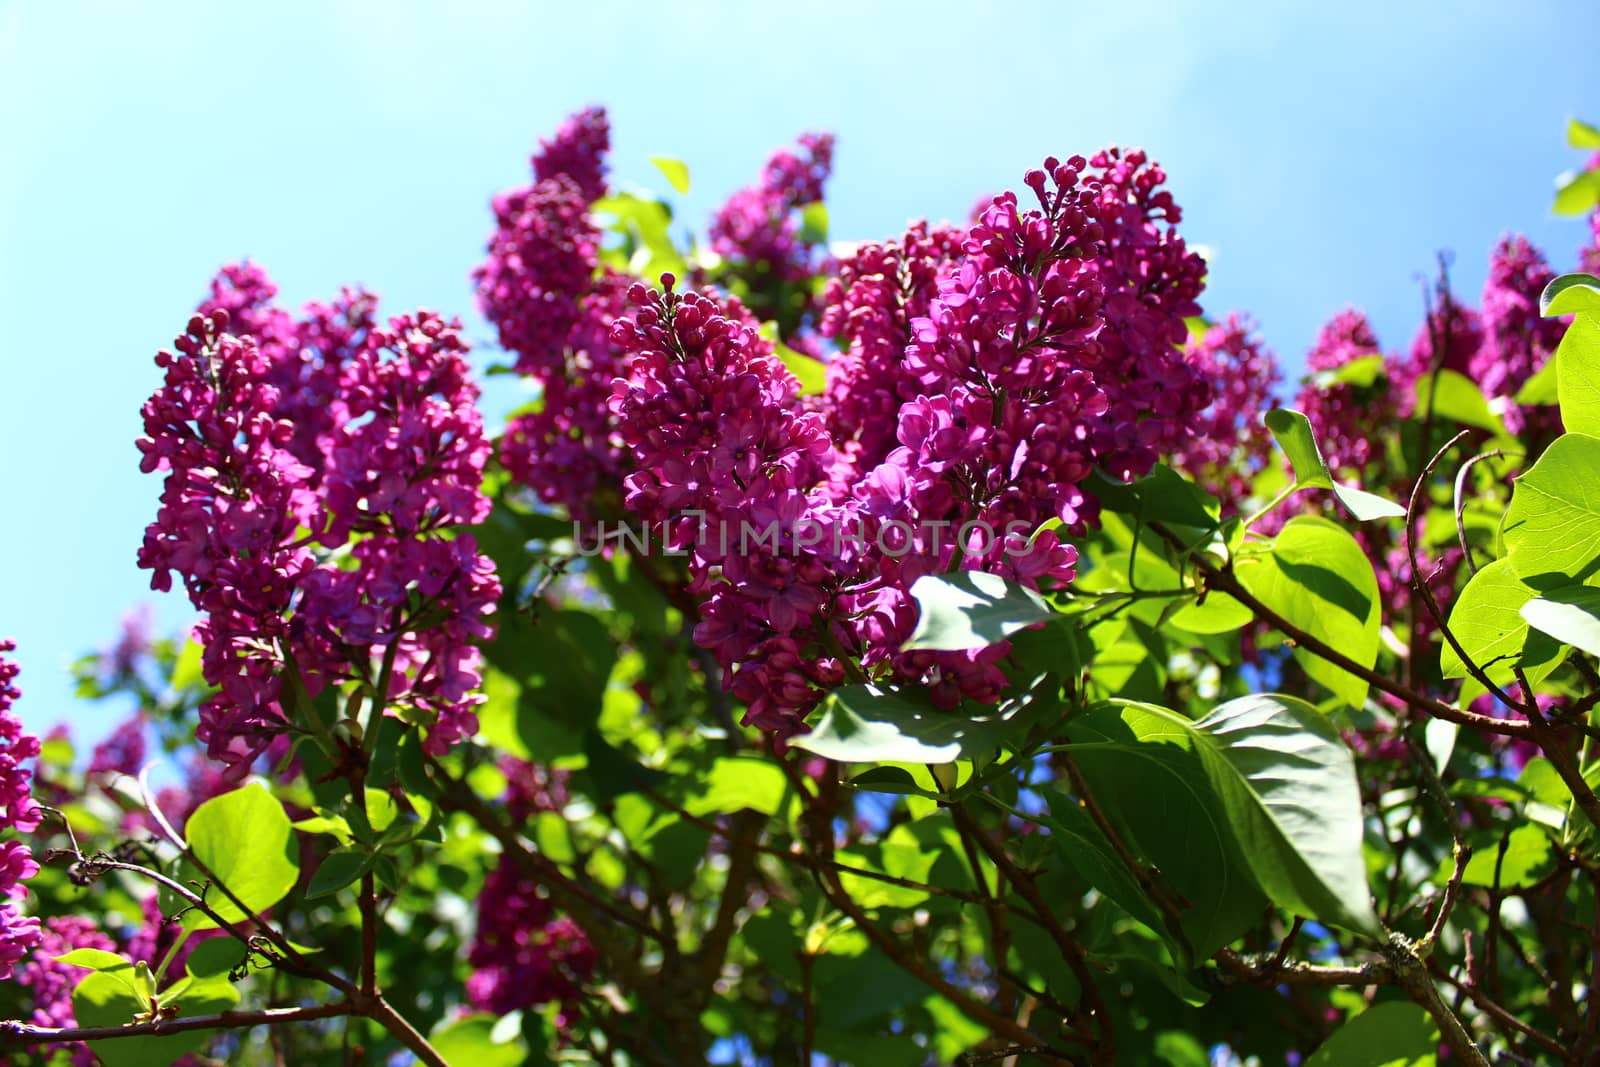 The picture shows beautiful lilac in the garden